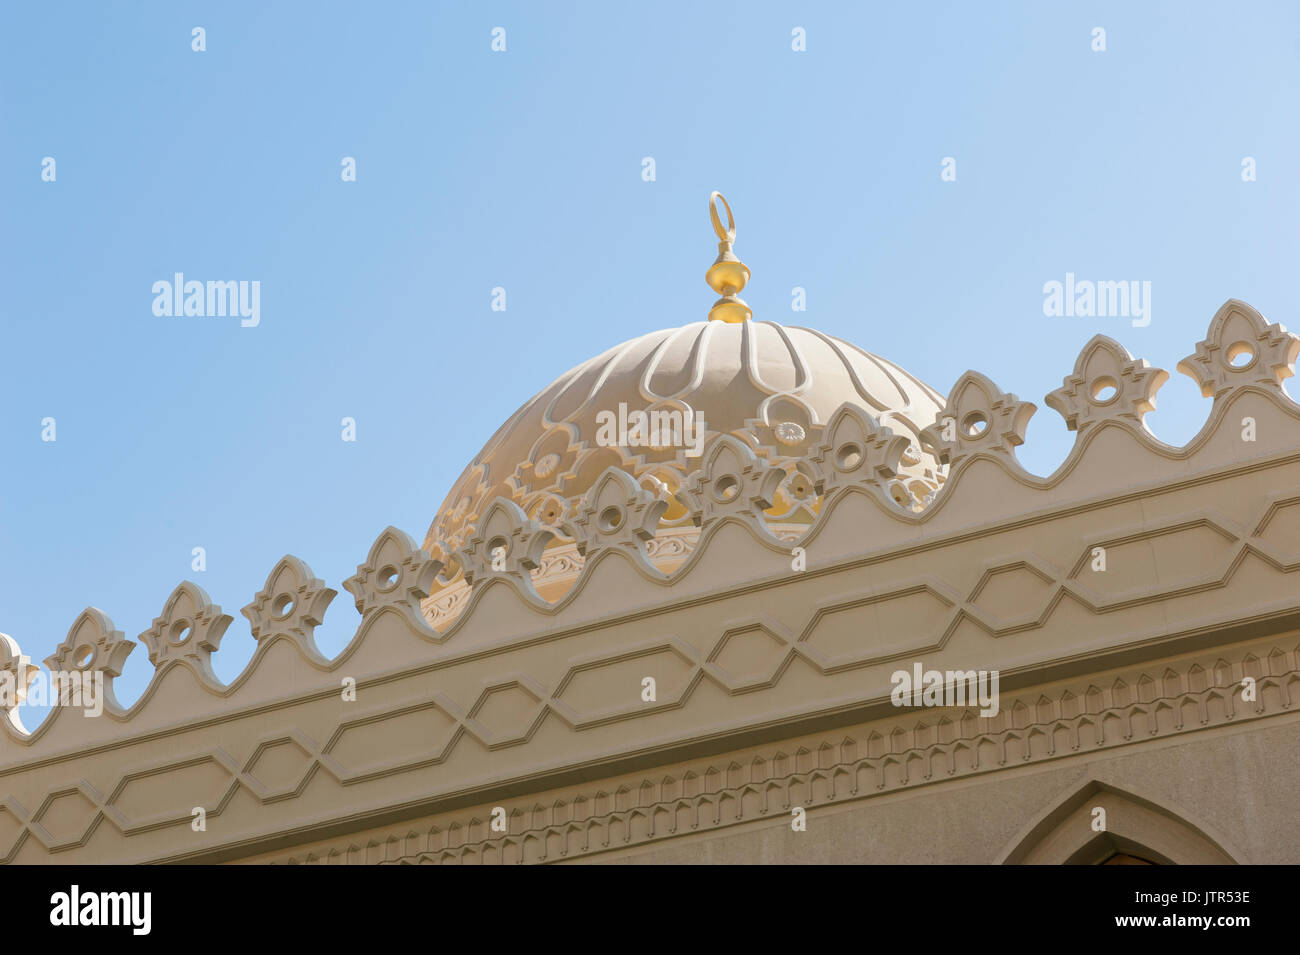 Closeup detail of ornate architecture on a mosque in the middle east Stock Photo